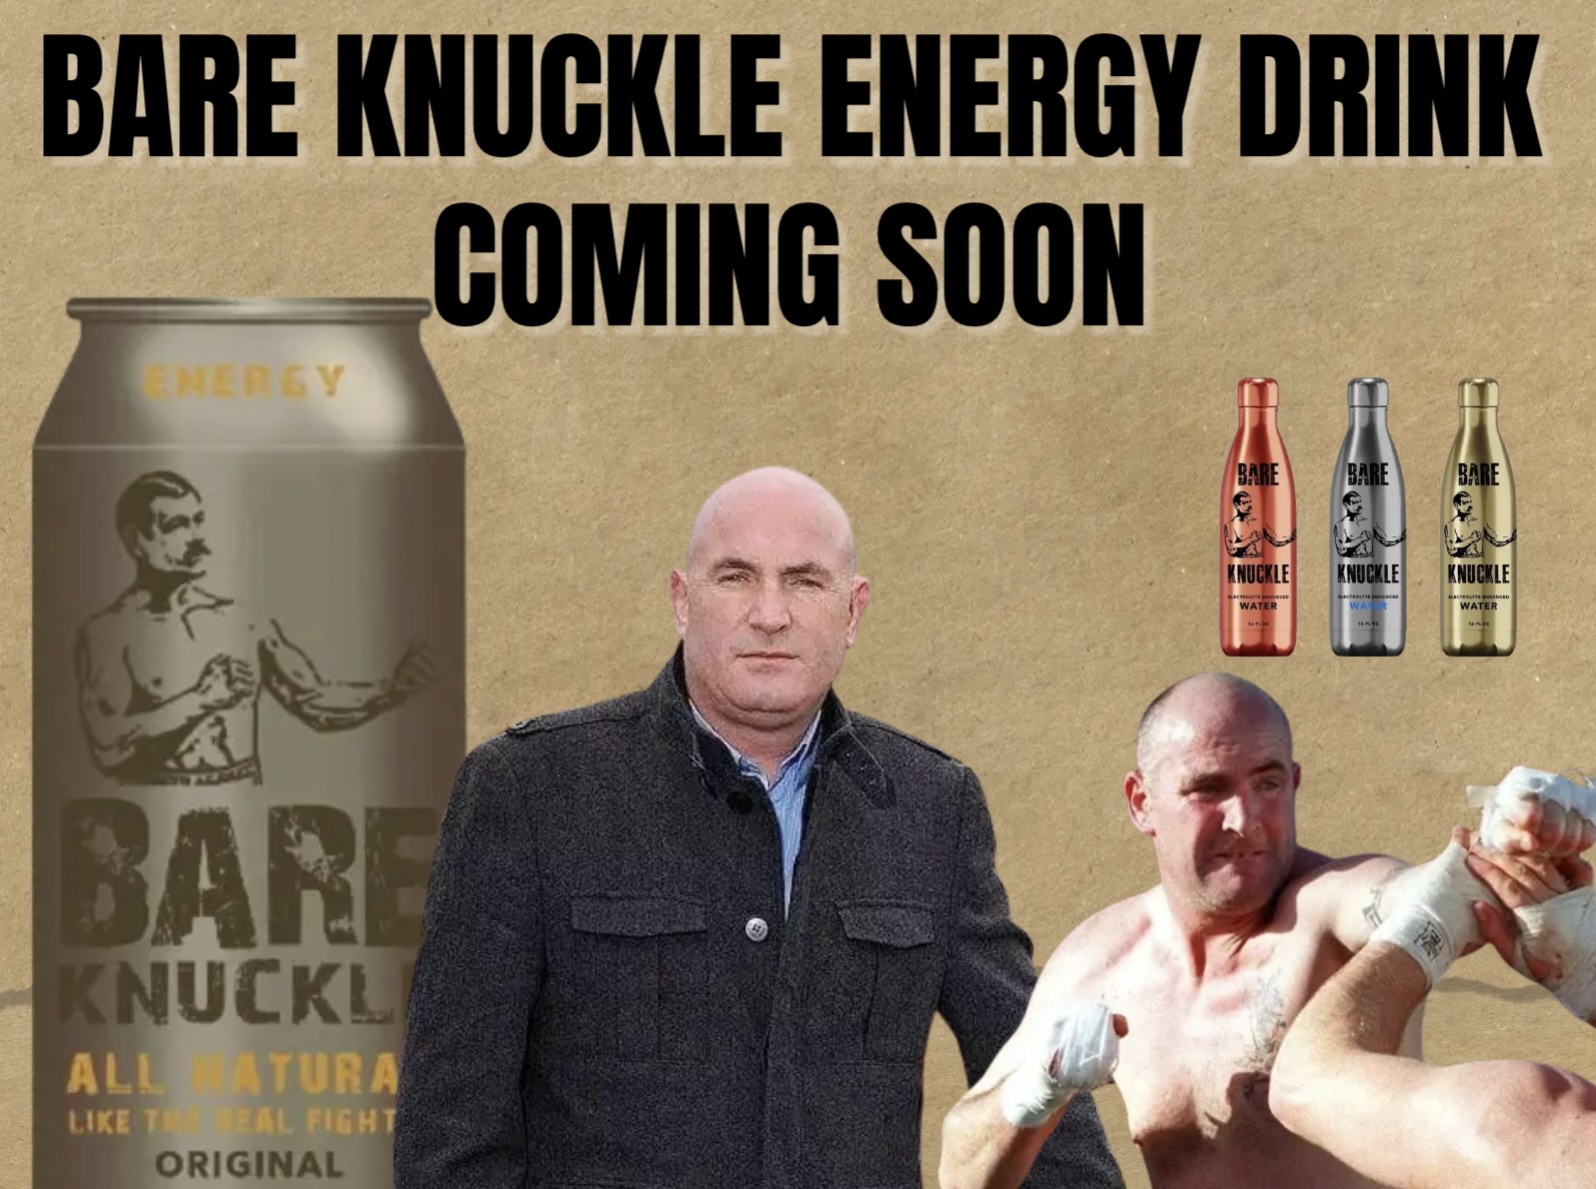 New ‘Bare Knuckle’ energy drink out this summer